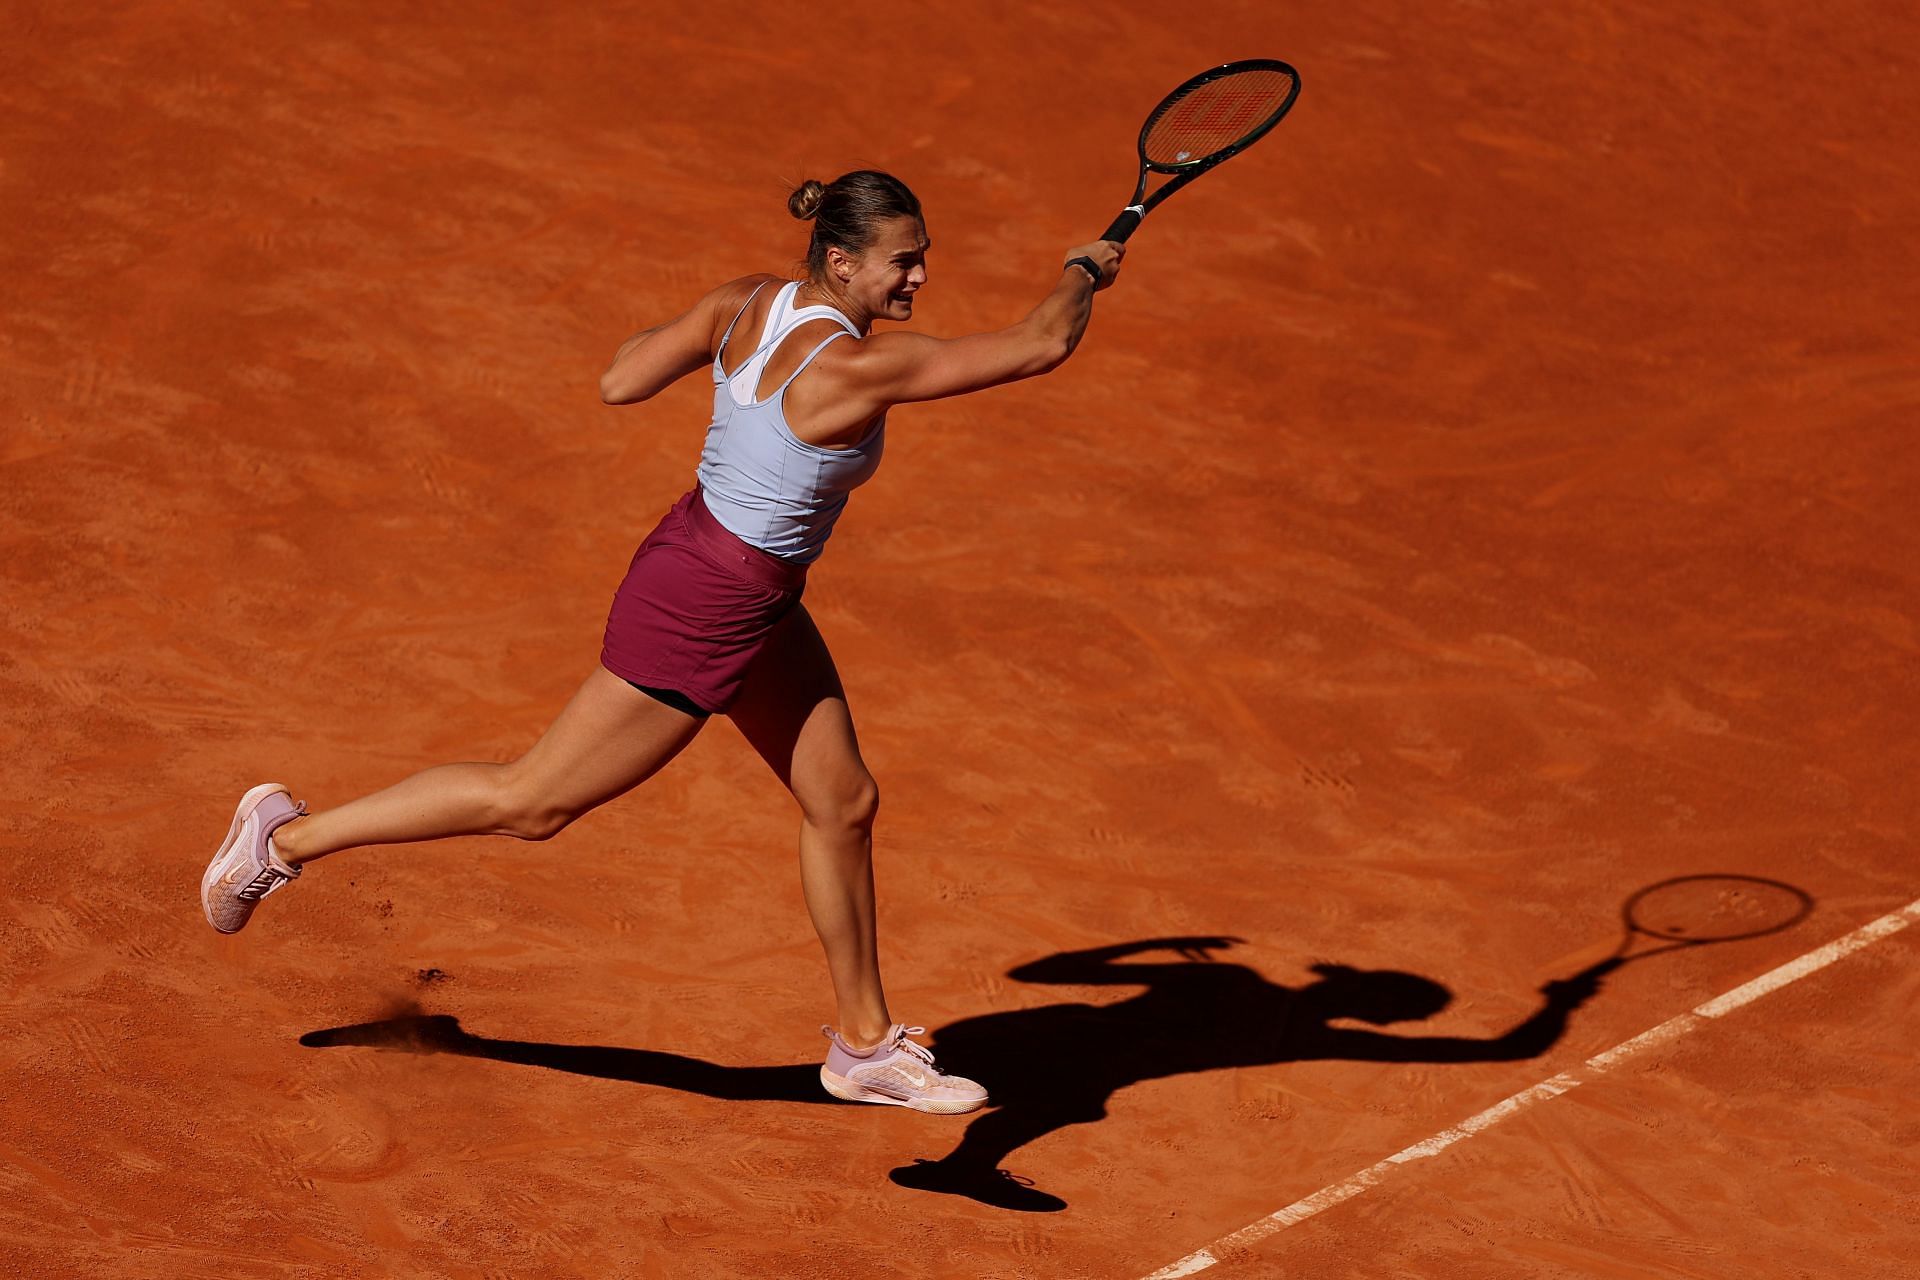 Italian Open 2023: Women's draw, schedule, players, prize money & more